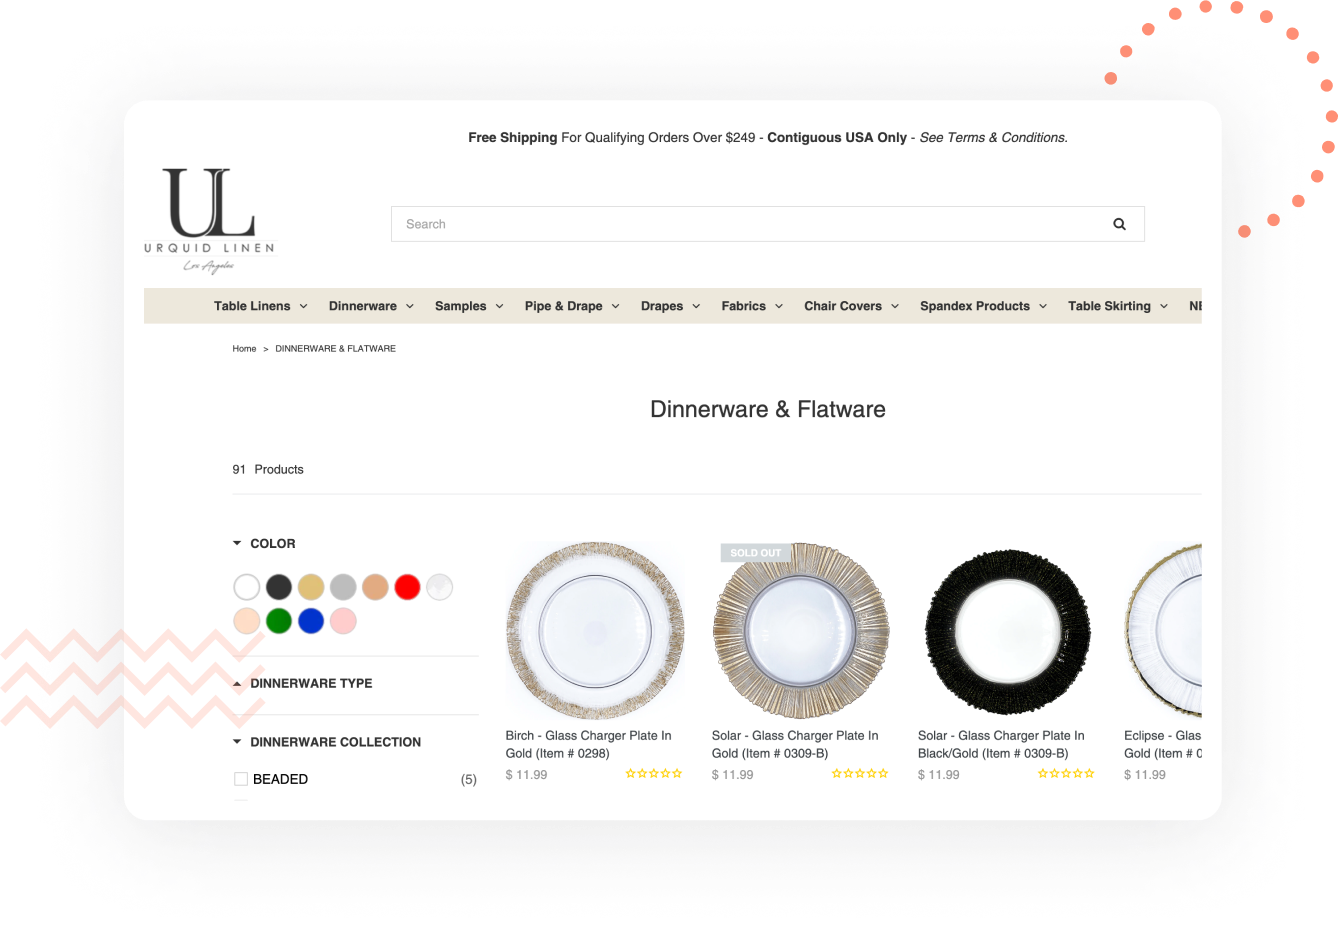 urquid linen testimonial boost ai search and discovery 